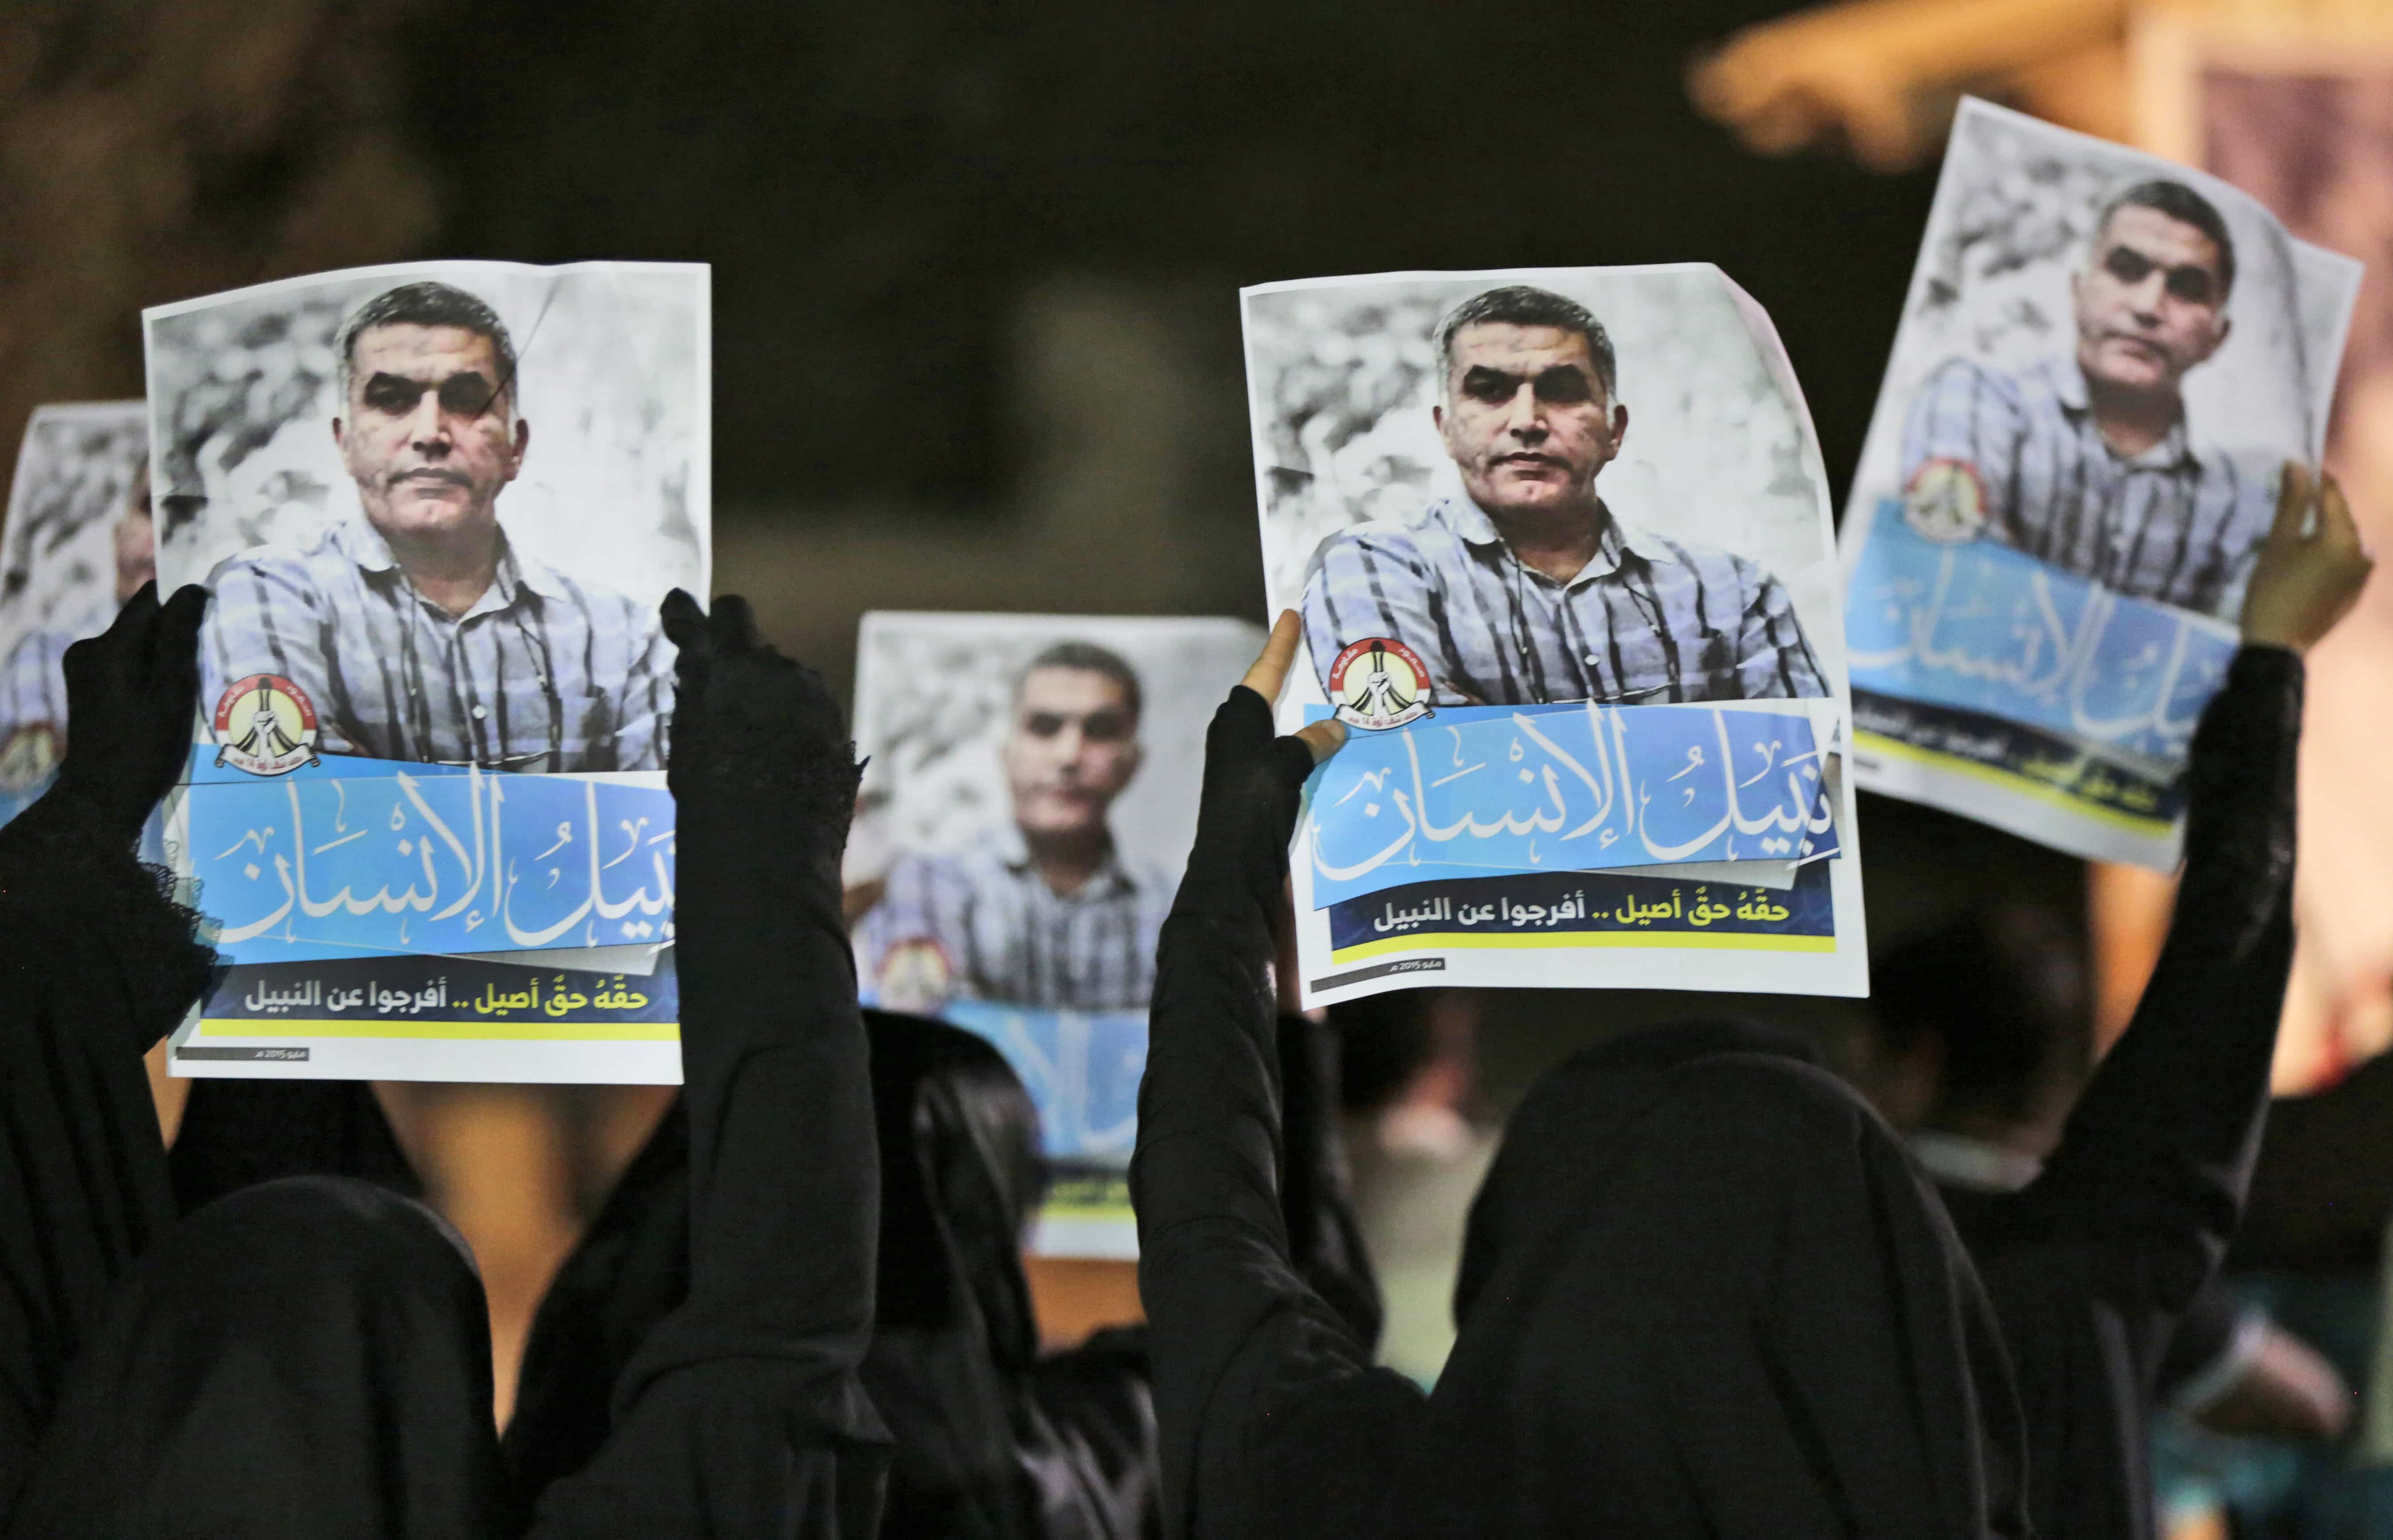 In this May 14, 2015 file photo, Bahraini anti-government protesters hold up images of jailed human rights activist Nabeel Rajab during a solidarity protest outside his home in Bani Jamra, Bahrain., AP Photo/Hasan Jamali, File